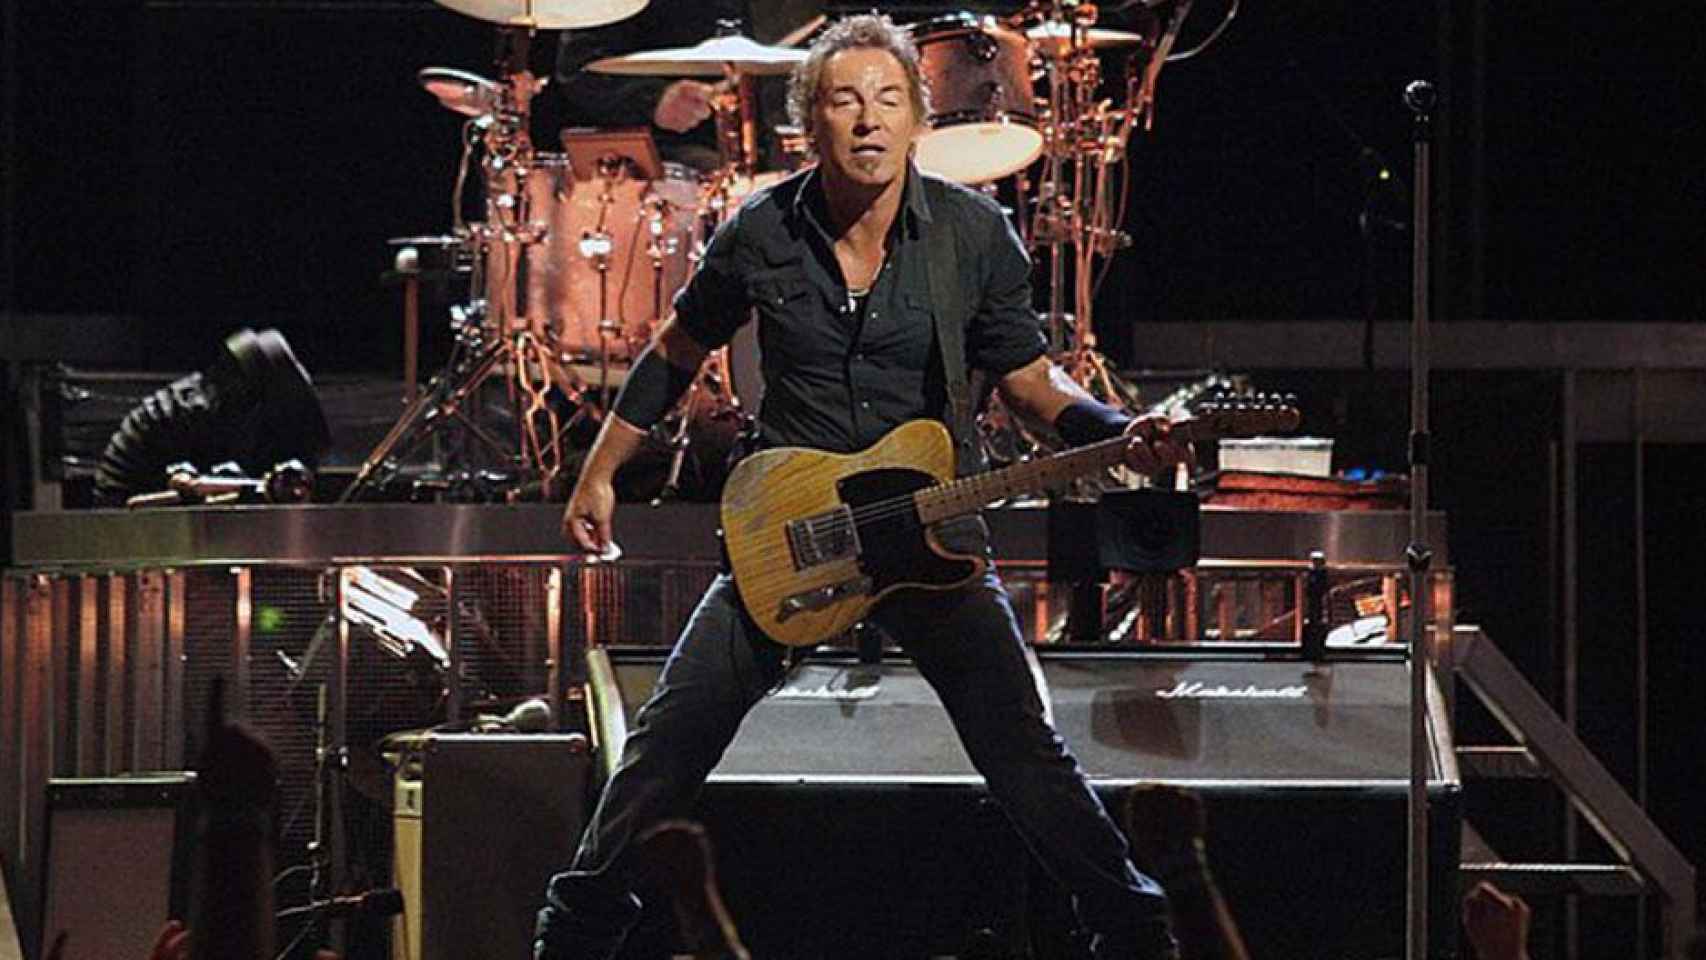 Bruce Springsteen  / CRAIG ONEAL - WIKIMEDIA COMMONS